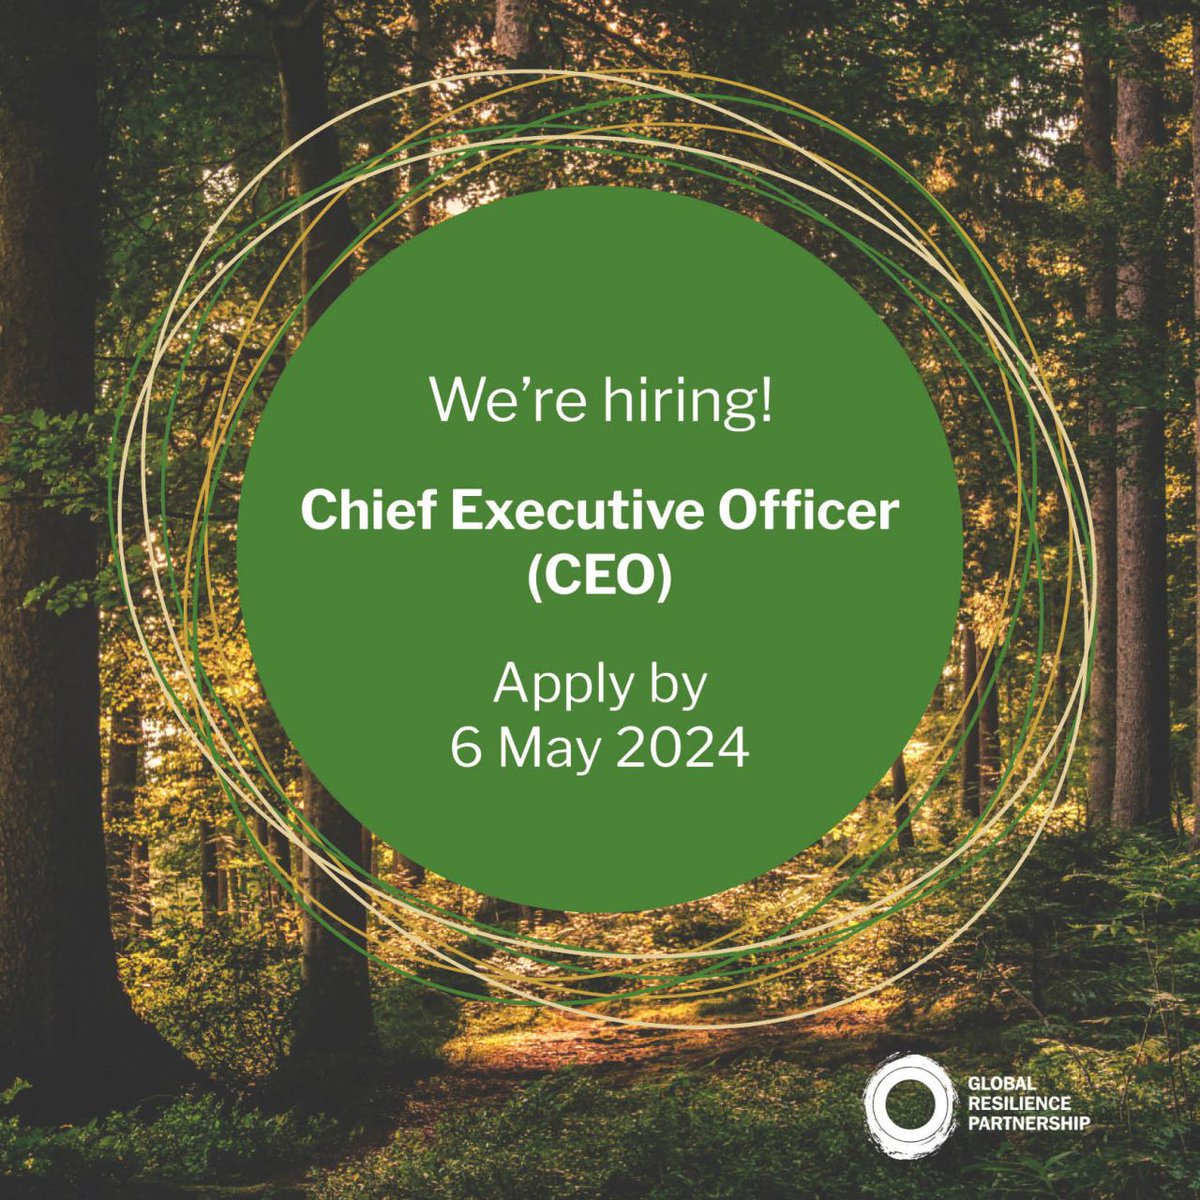 ✨Only a few days left to apply! We're seeking a visionary leader to join us as CEO. If you're passionate about #climate change resilience and sustainability, and thrive on collaborative leadership, this is the opportunity for you! 🗓️ Deadline: 6 May bit.ly/3Uk7H6H